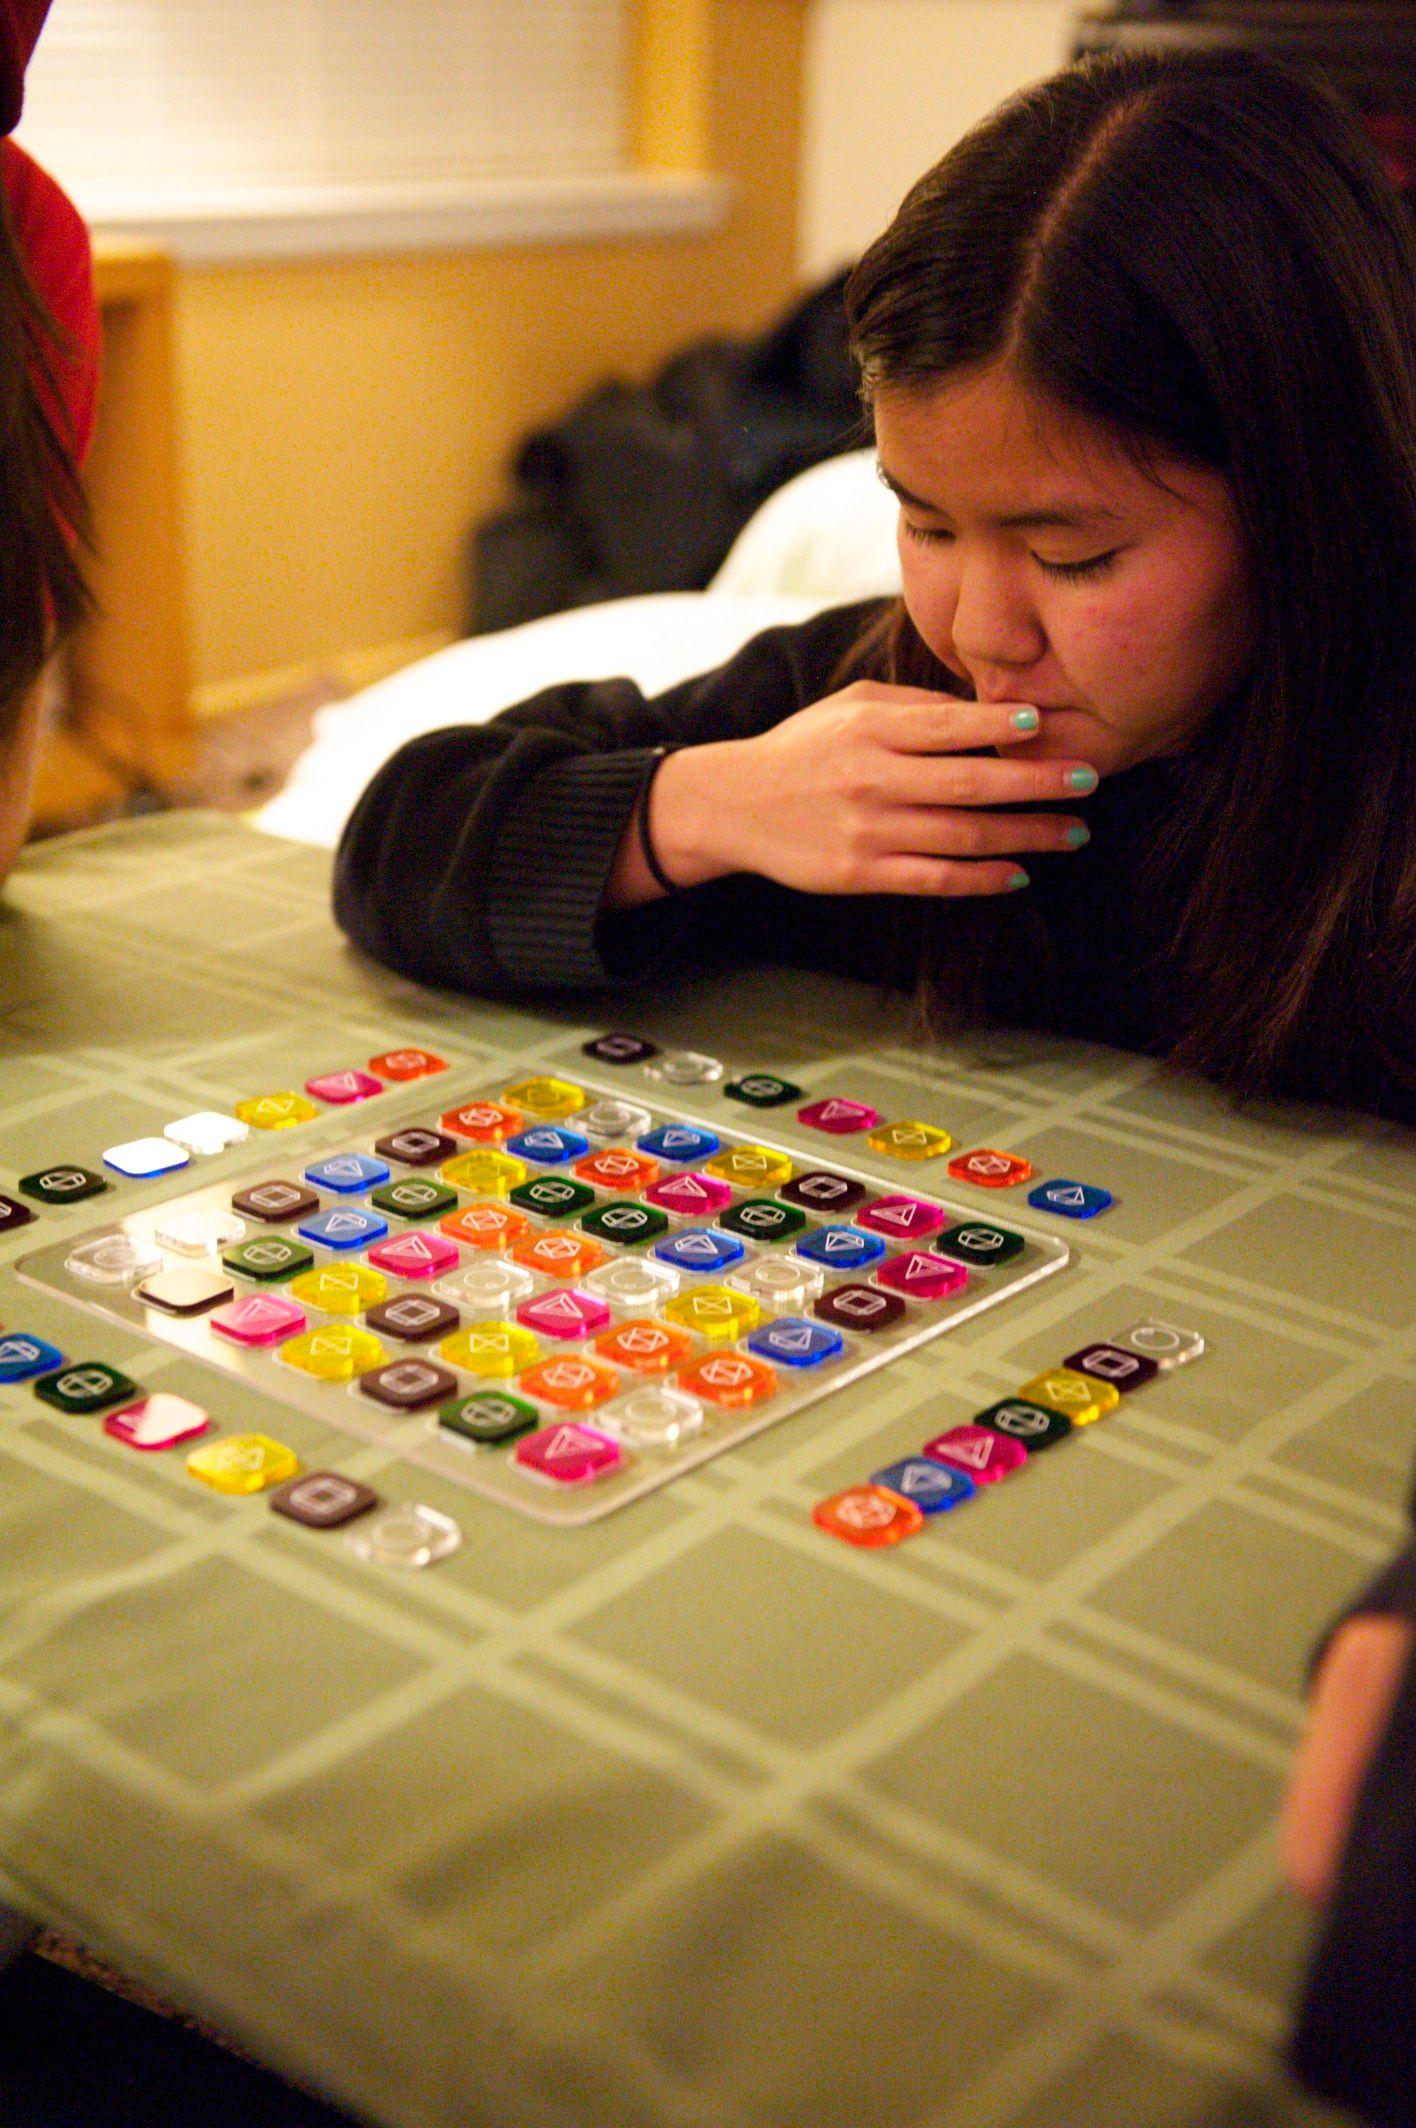 There is an Asian person looking down with their hand to their mouth that seems to be thinking. They are looking at a clear board filled with colorful square tokens arranged in a particular pattern.